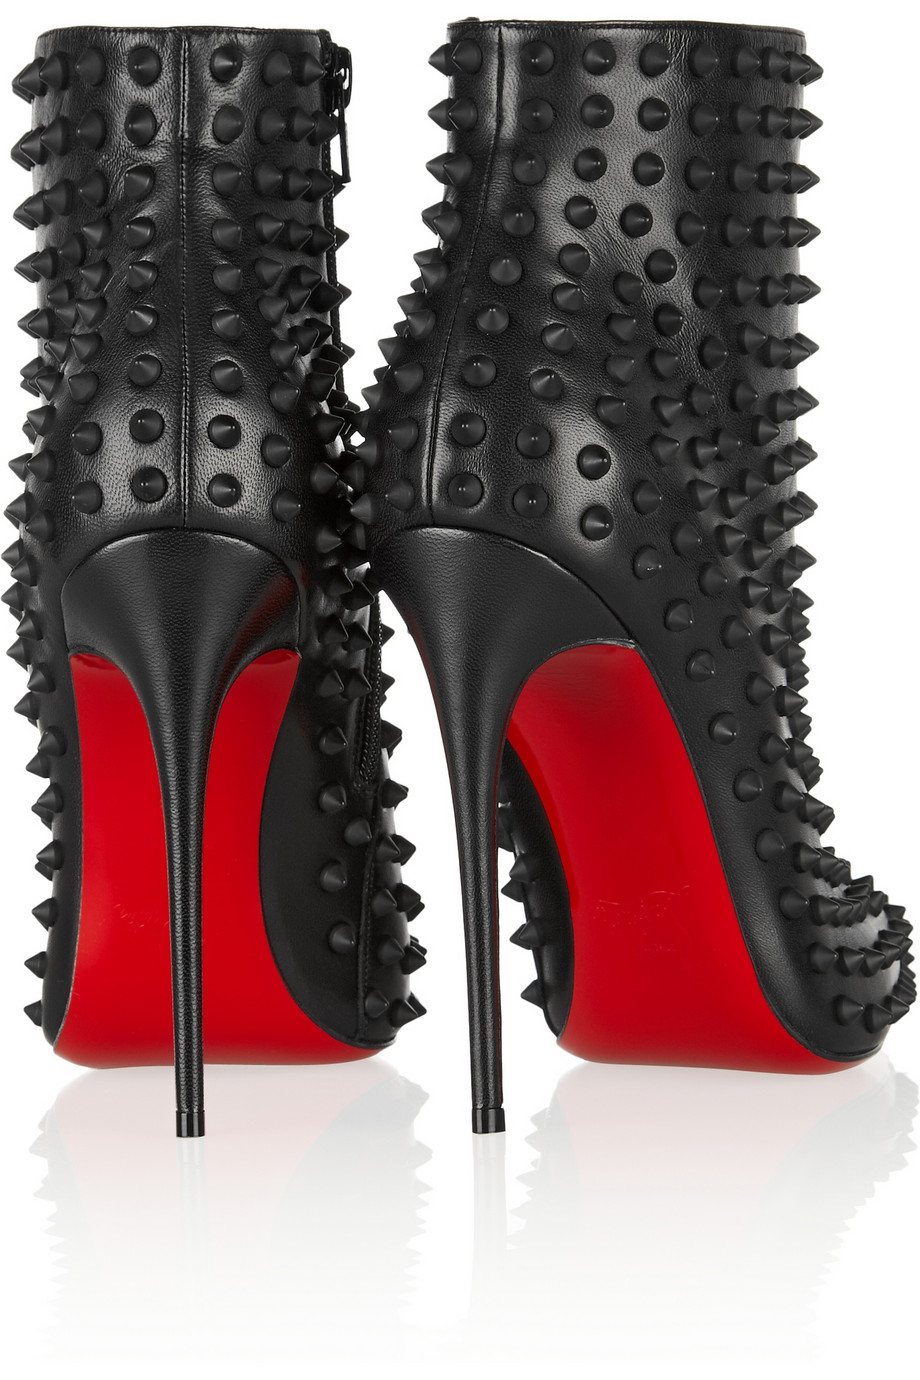 Lyst - Christian louboutin Snakilta 120 Spiked Leather Ankle Boots in Black